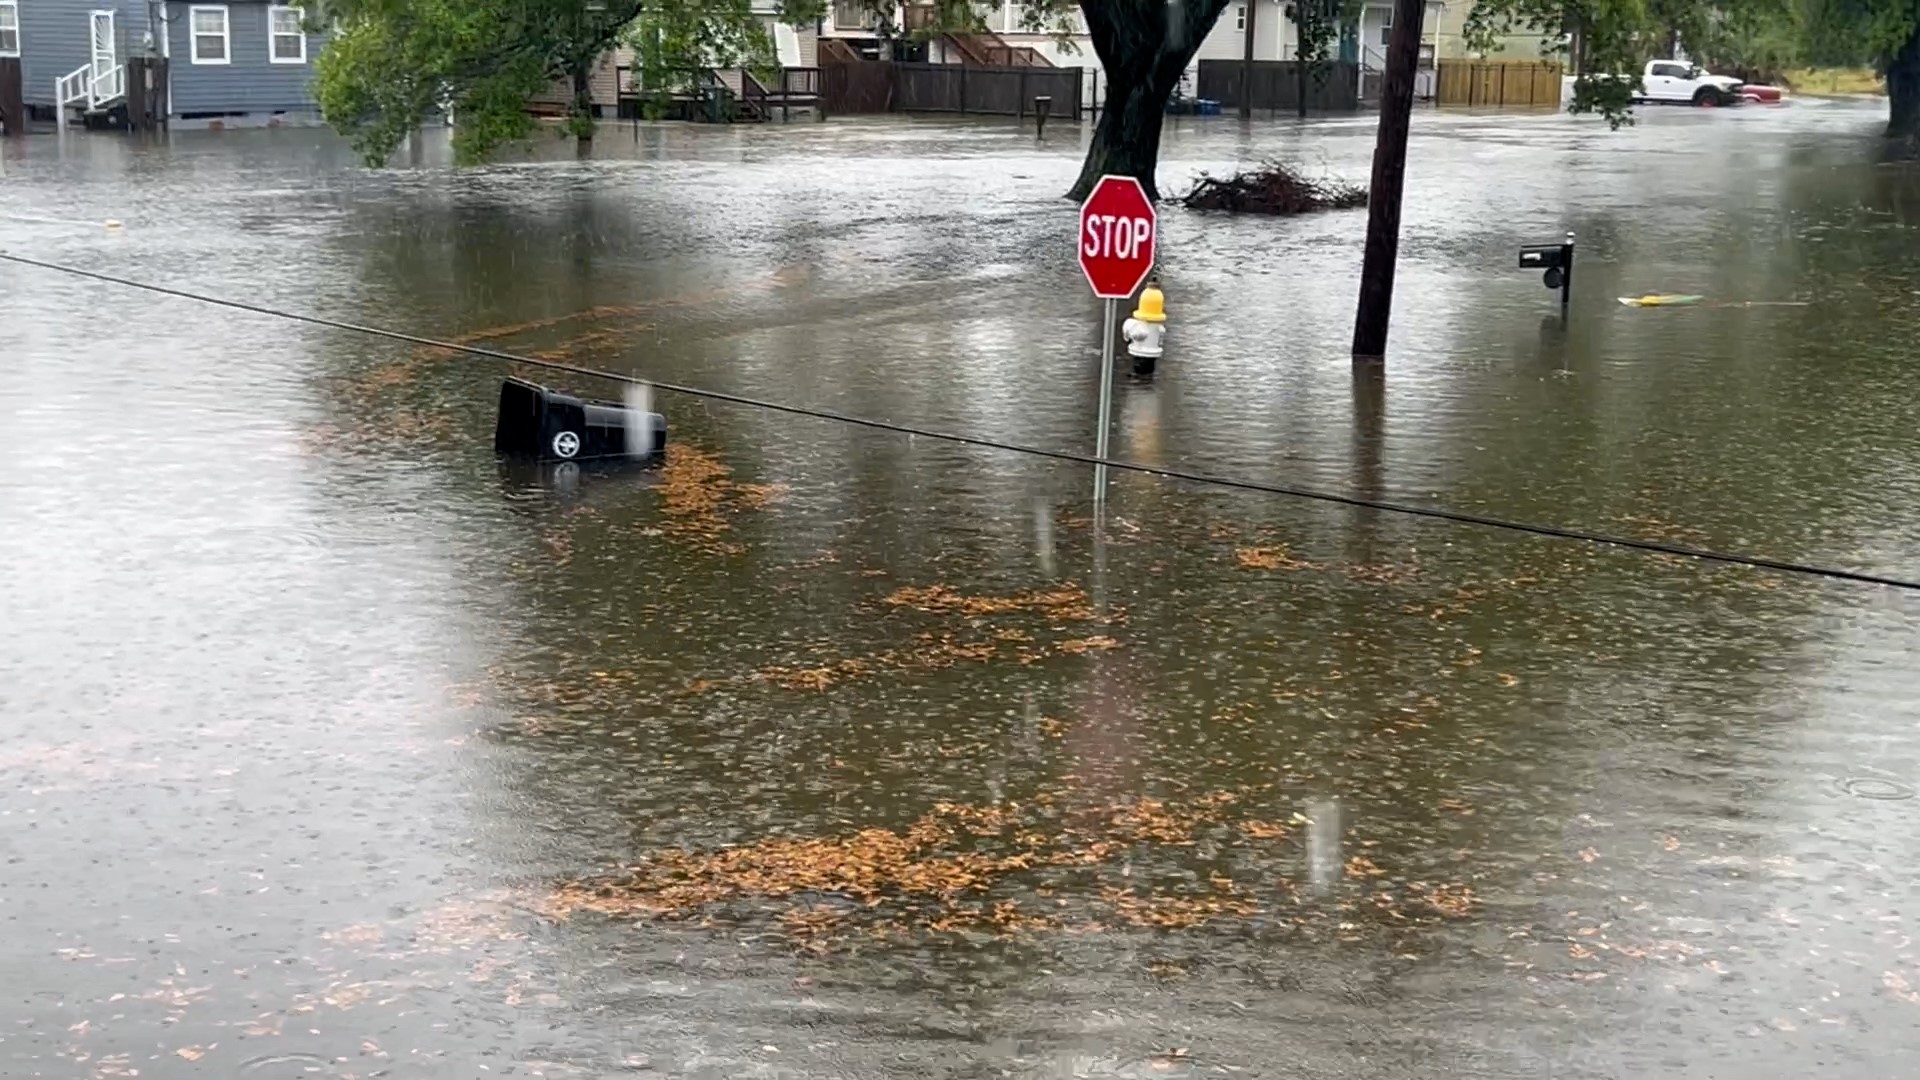 WWL Louisiana viewer and New Orleans resident Karla Ray captured street flooding in Gentilly following heavy rain from a wave of strong storms on Wednesday, April 10